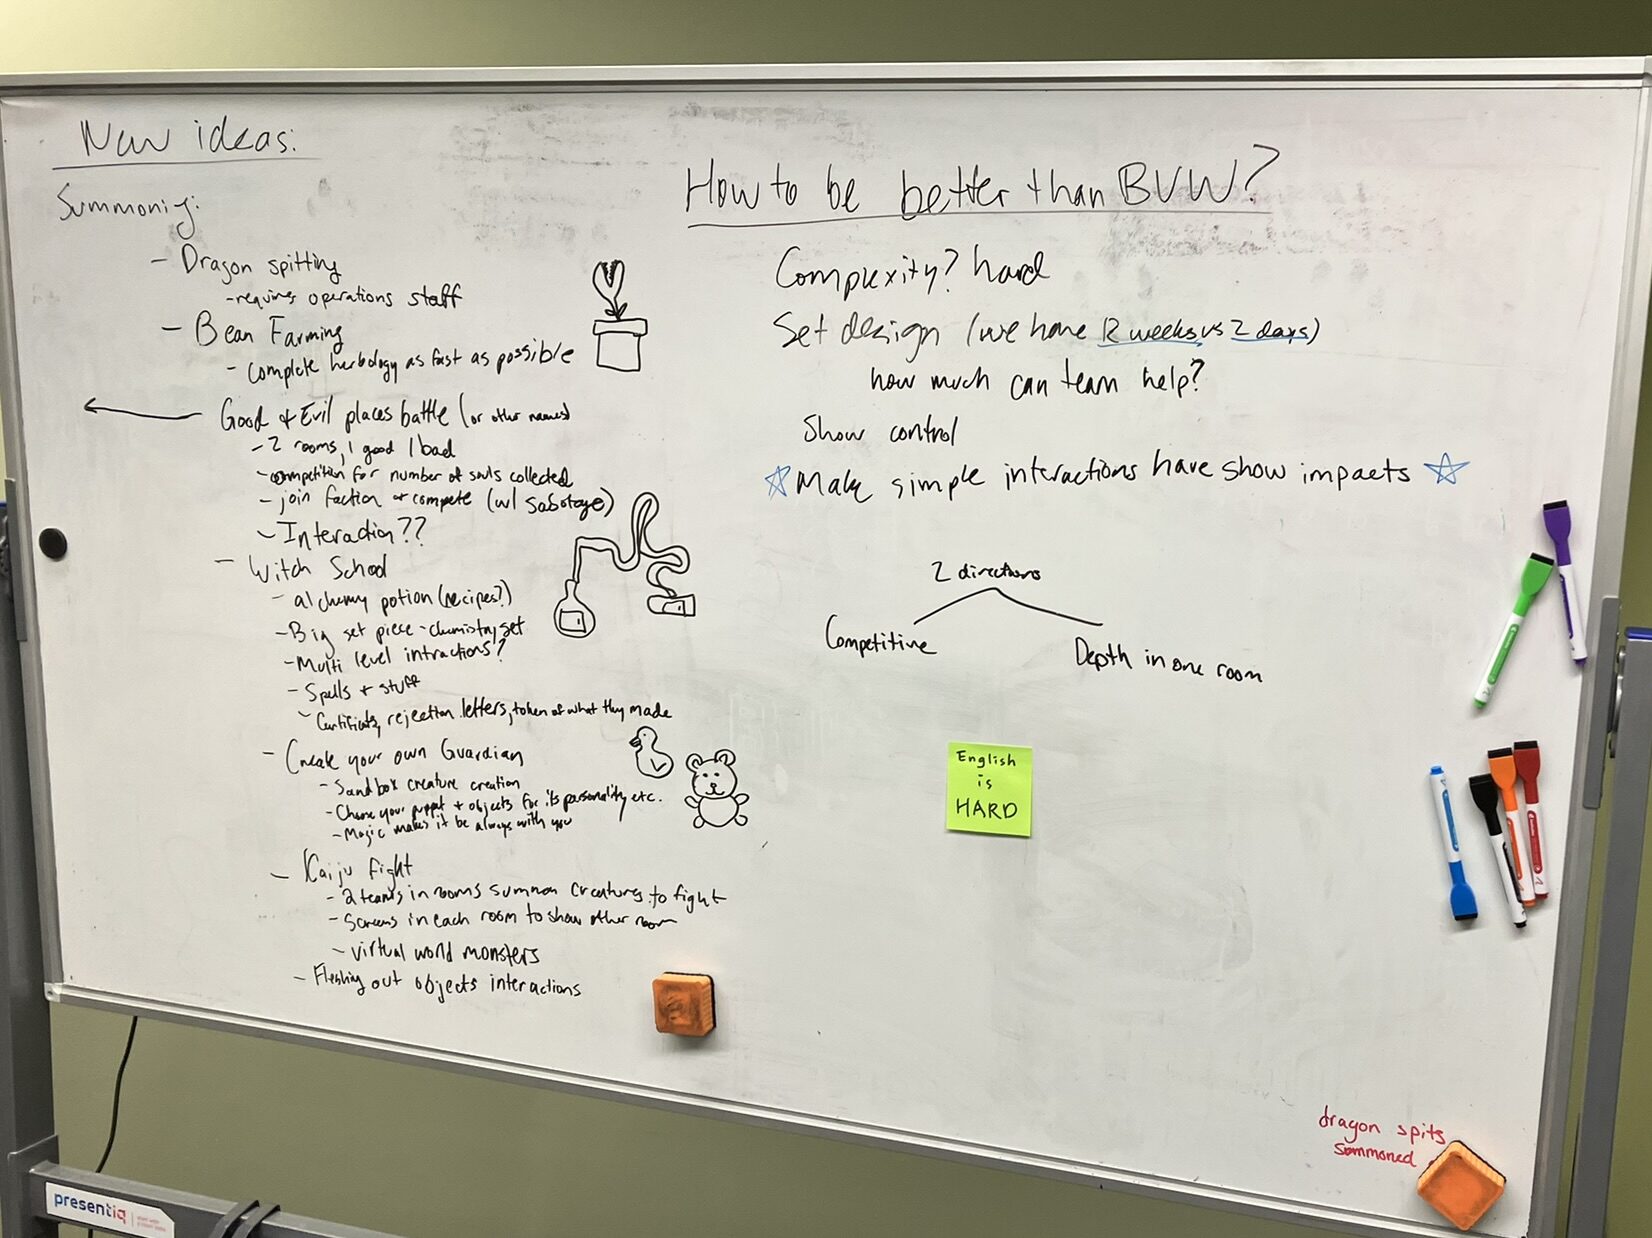 A whiteboard showing new ideas for the Summoning theme, as well as brainstorming about "How to be better than BVW?" and 2 possible directions for the space decision. A post it note says "English is HARD."